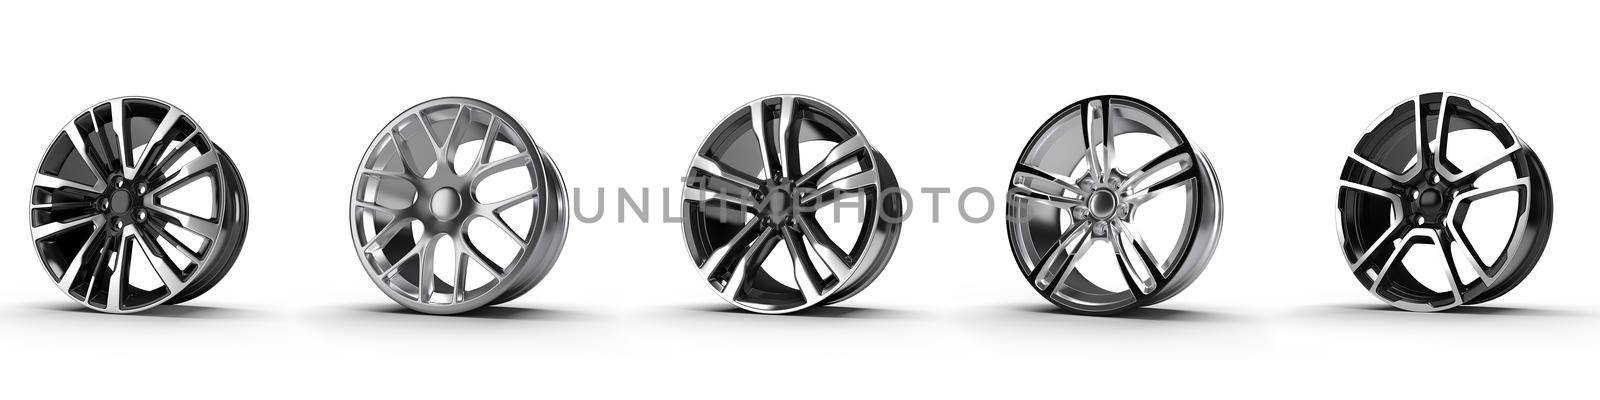 five car disc on a white background 3D rendering illustration.